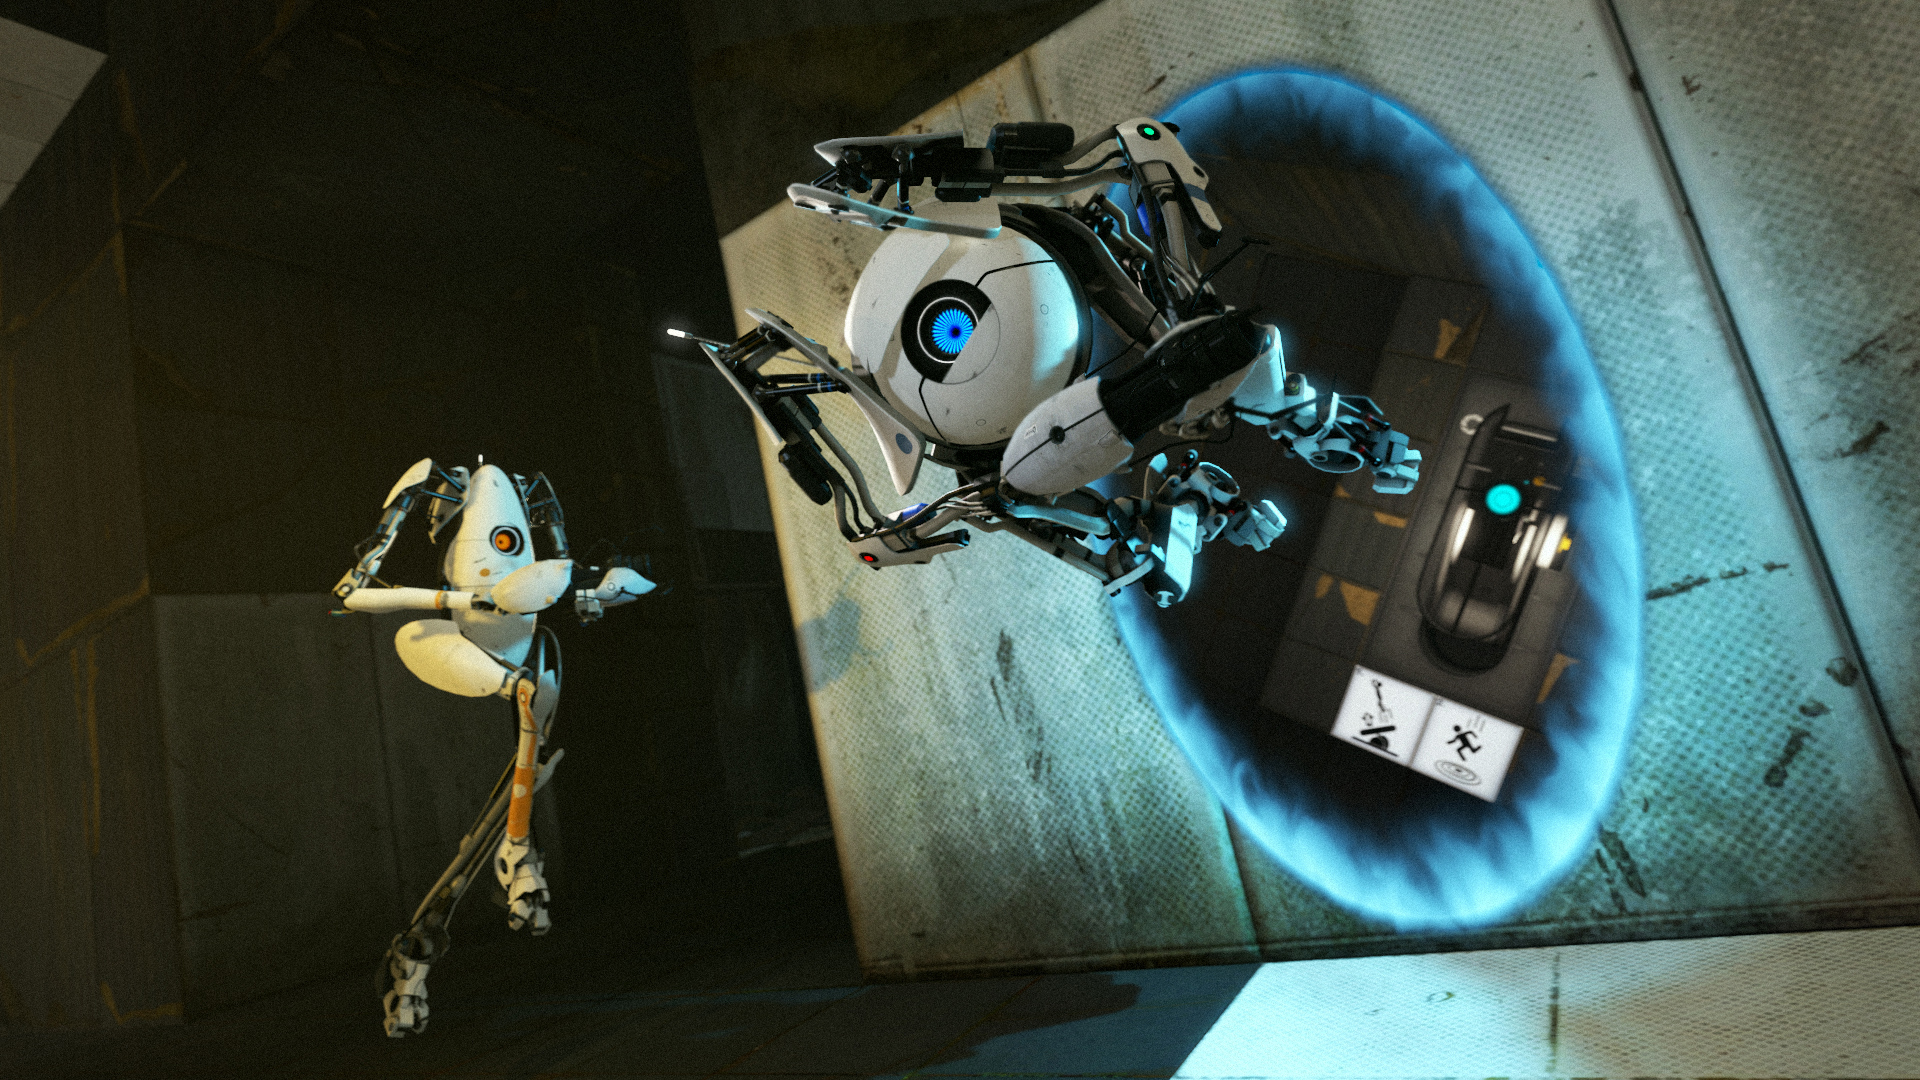 An image displaying two robots from Portal 2